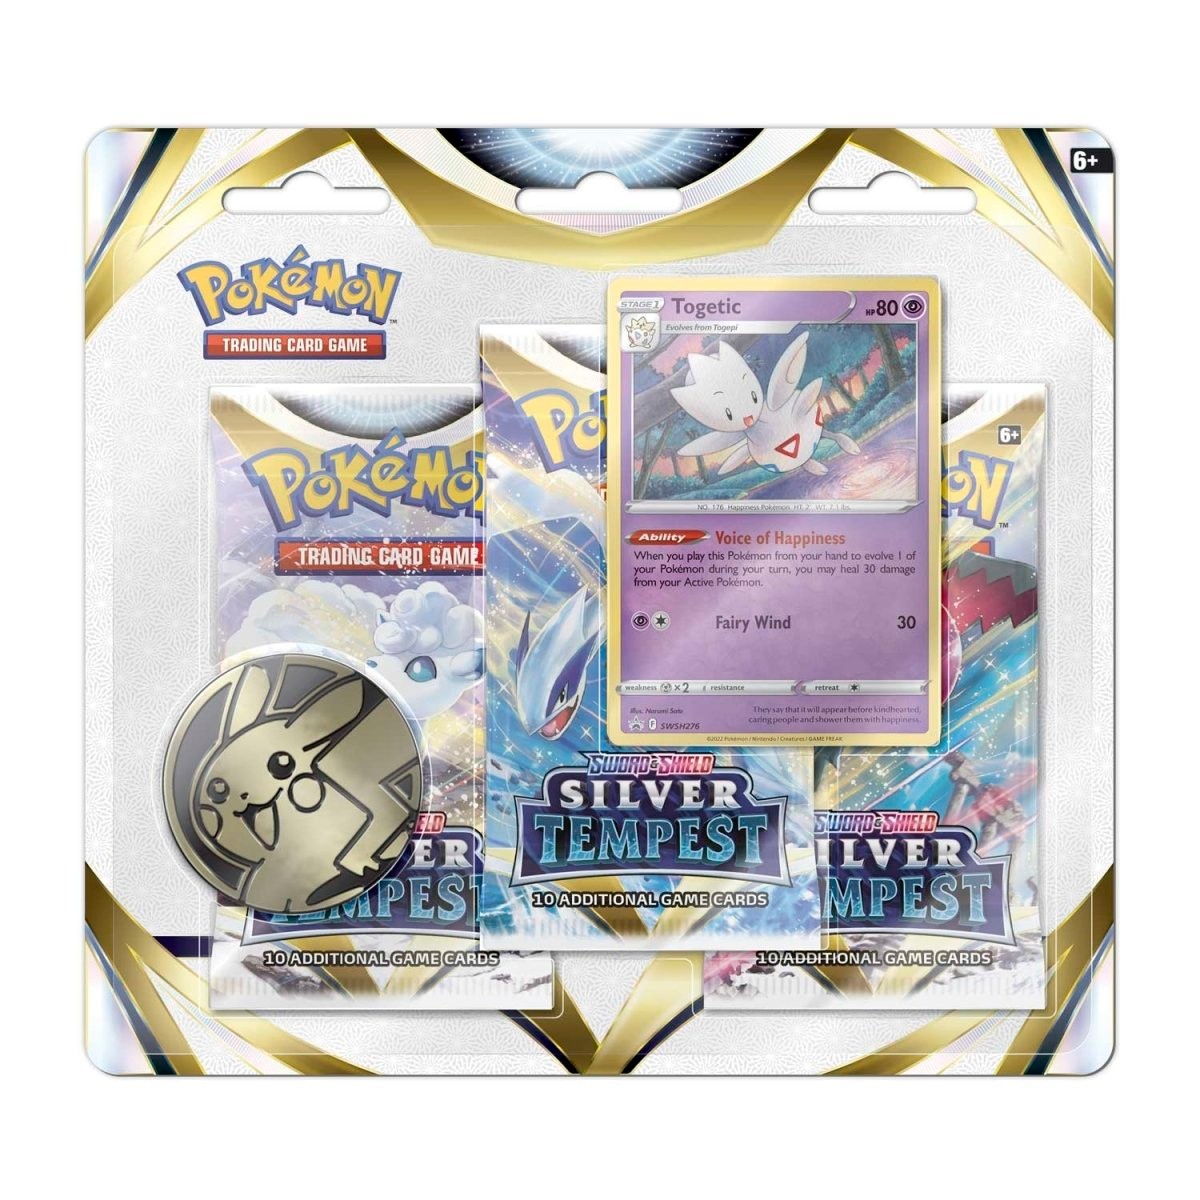 Pokémon TCG: Sword & Shield-Silver Tempest 3 Booster Packs, Coin & Togetic Promo Card